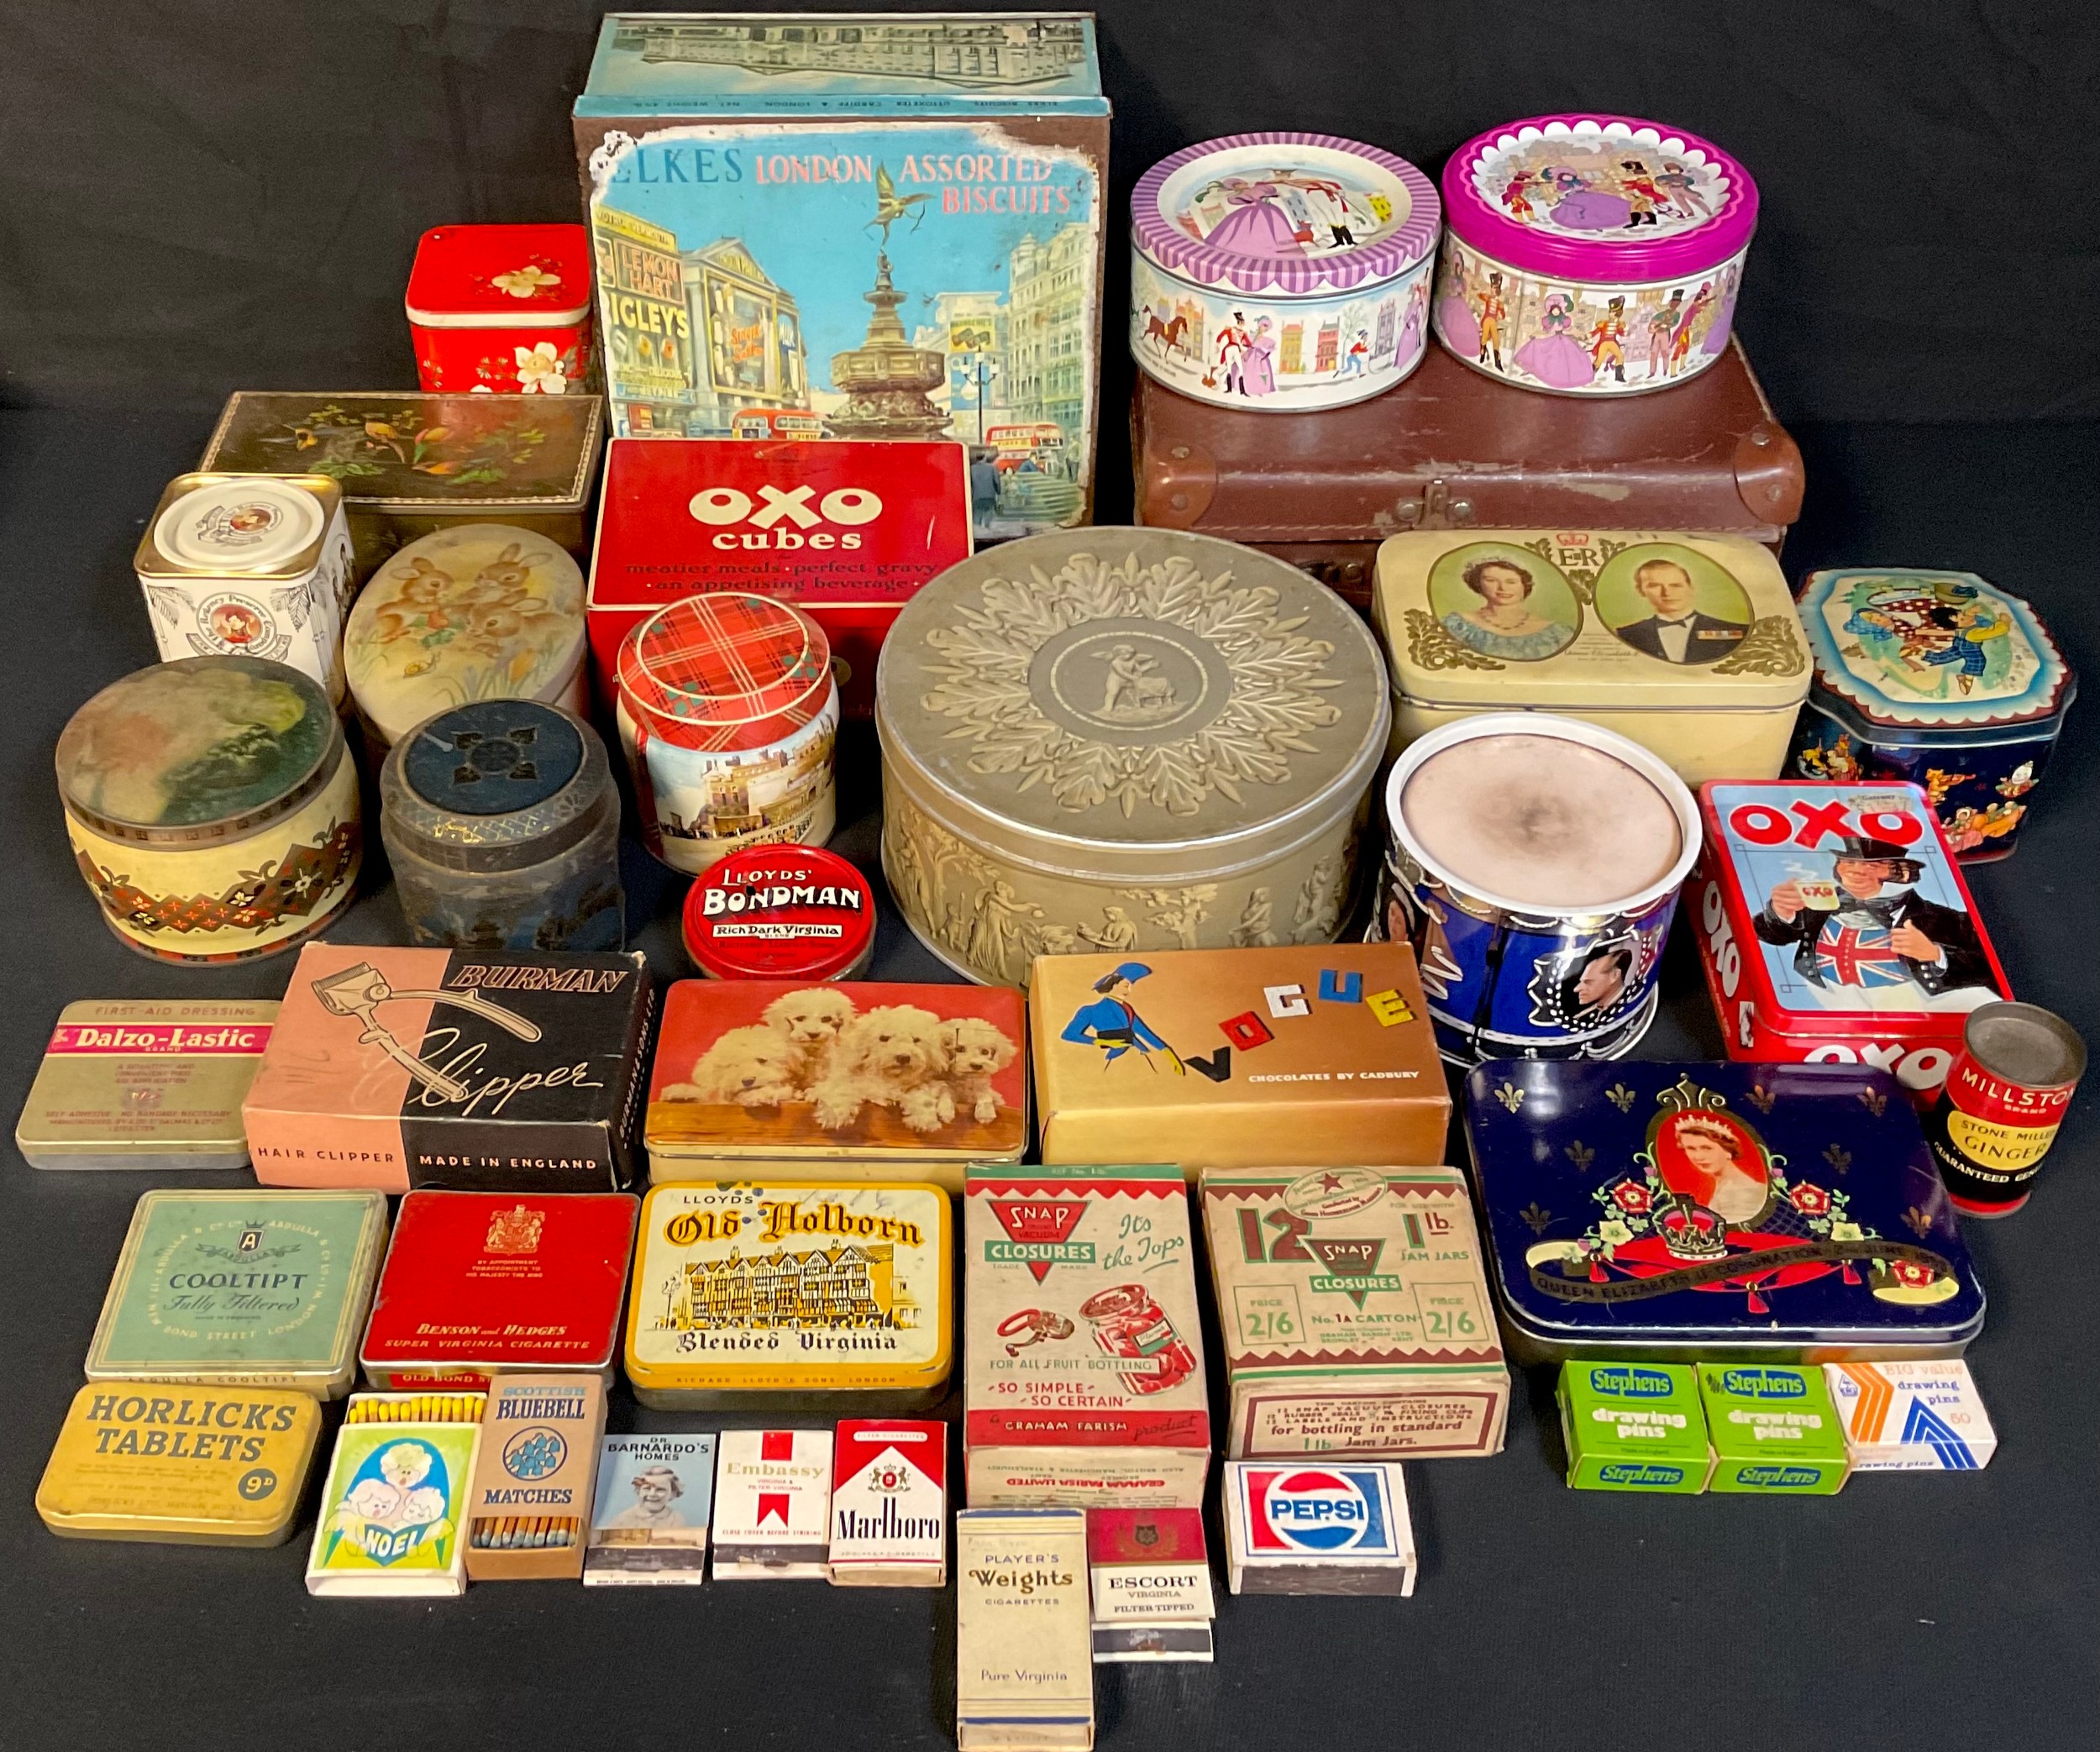 Advertising - tins, including Elkes biscuits, Millstone Stone Milled Ginger, 7cm, Oxo, Quality